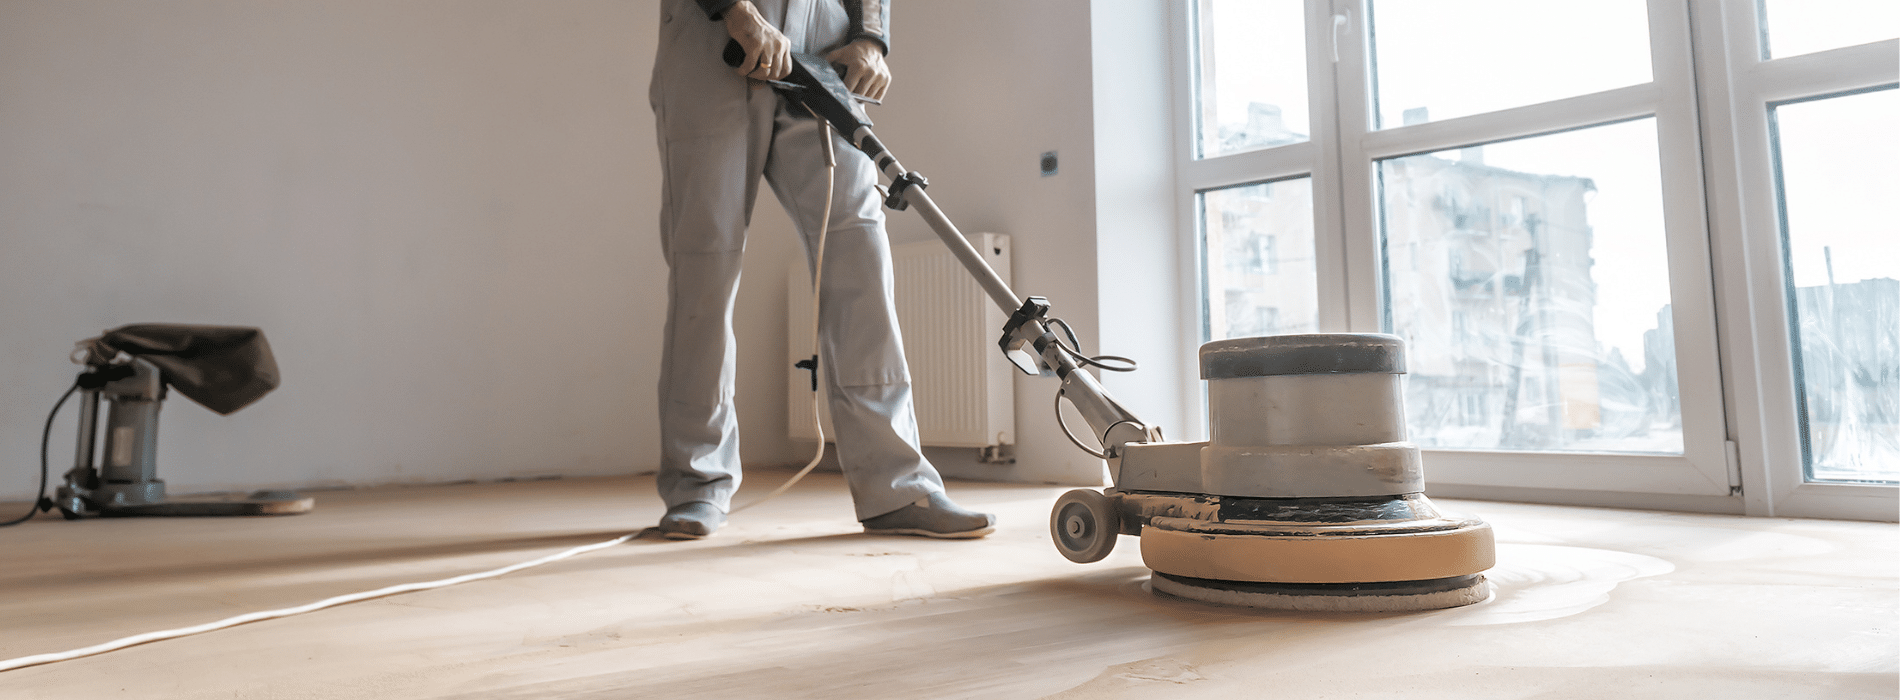 Versatile Bona FlexiSand 1.9 (Ø 407mm) buffer sander in Holloway, N7. Ideal for herringbone floor sanding, oiling, and grinding. Powerful 1.9kW motor and operates at 230V. Professional-grade equipment for efficient and high-quality floor restoration.